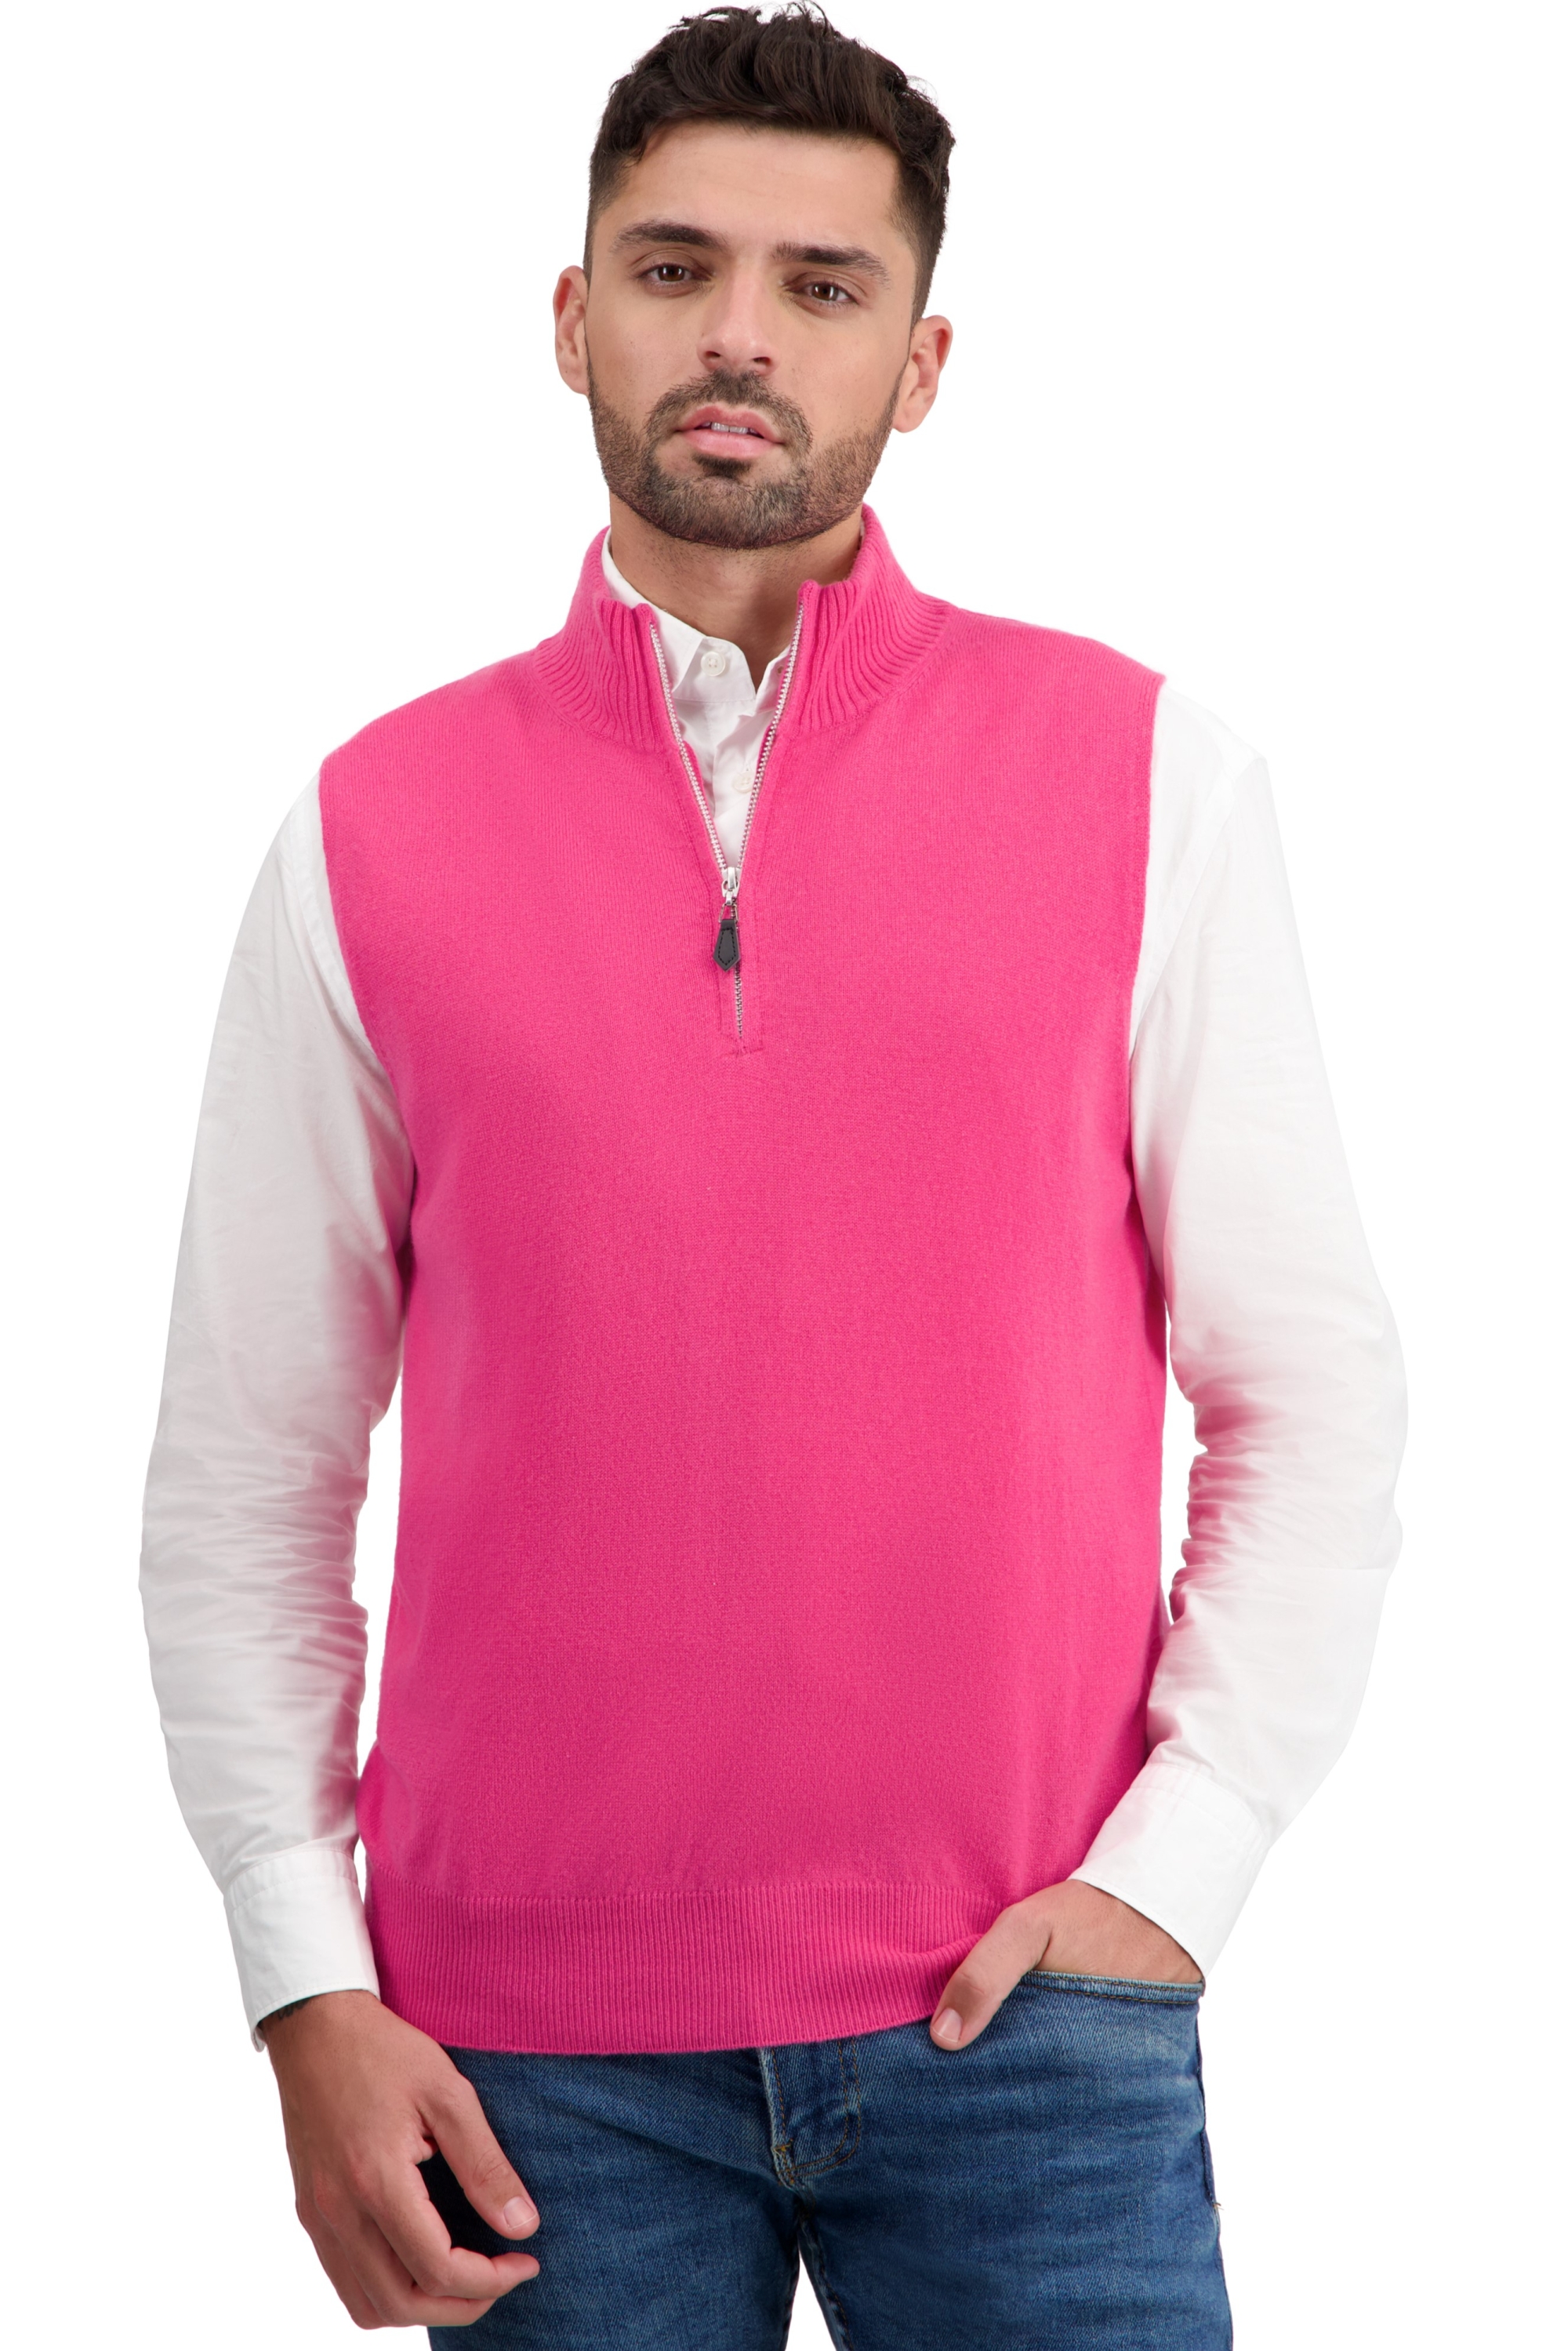 Cachemire pull homme texas rose shocking xl